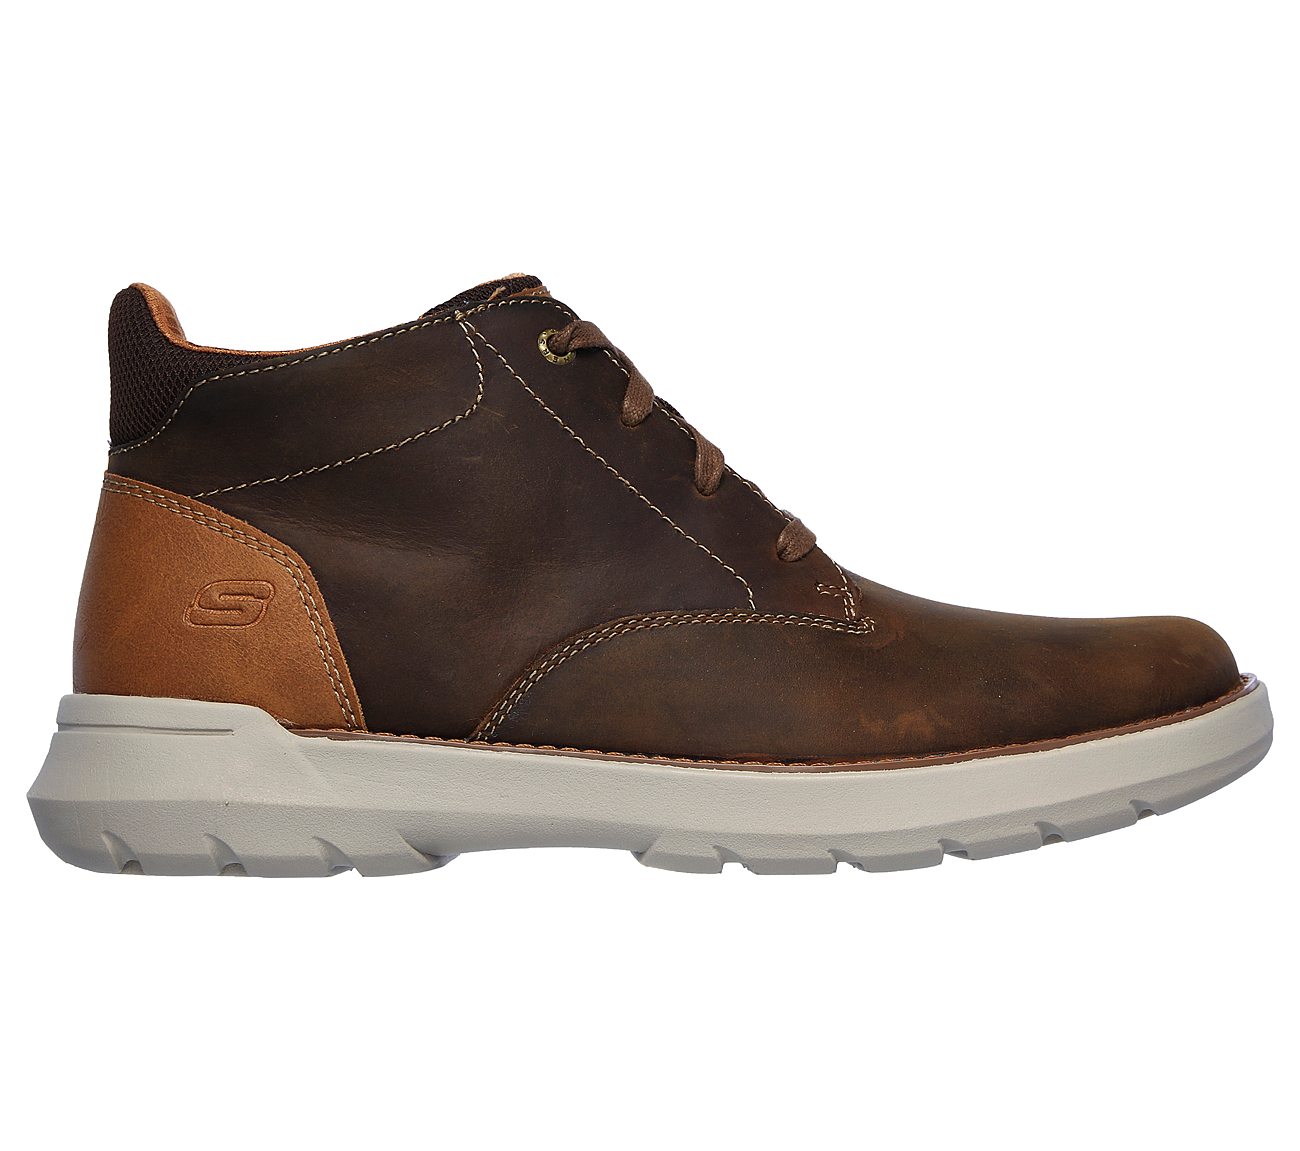 SKECHERS Relaxed Fit: Doveno - Molens 